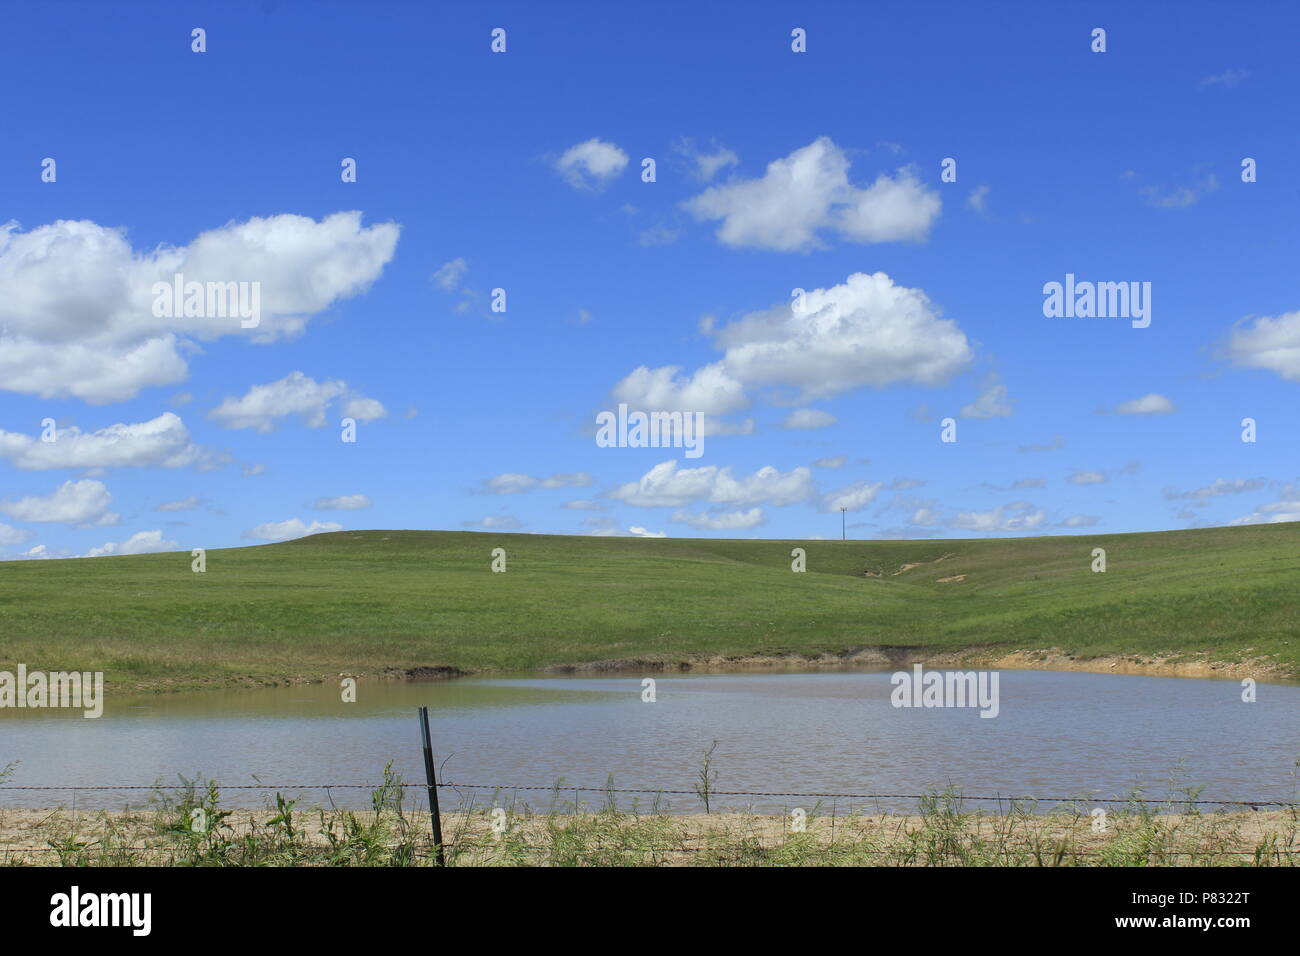 Kansas Green Pasture with a farm pond, blue sky, and clouds north of Lucas Kansas out in the country. Stock Photo